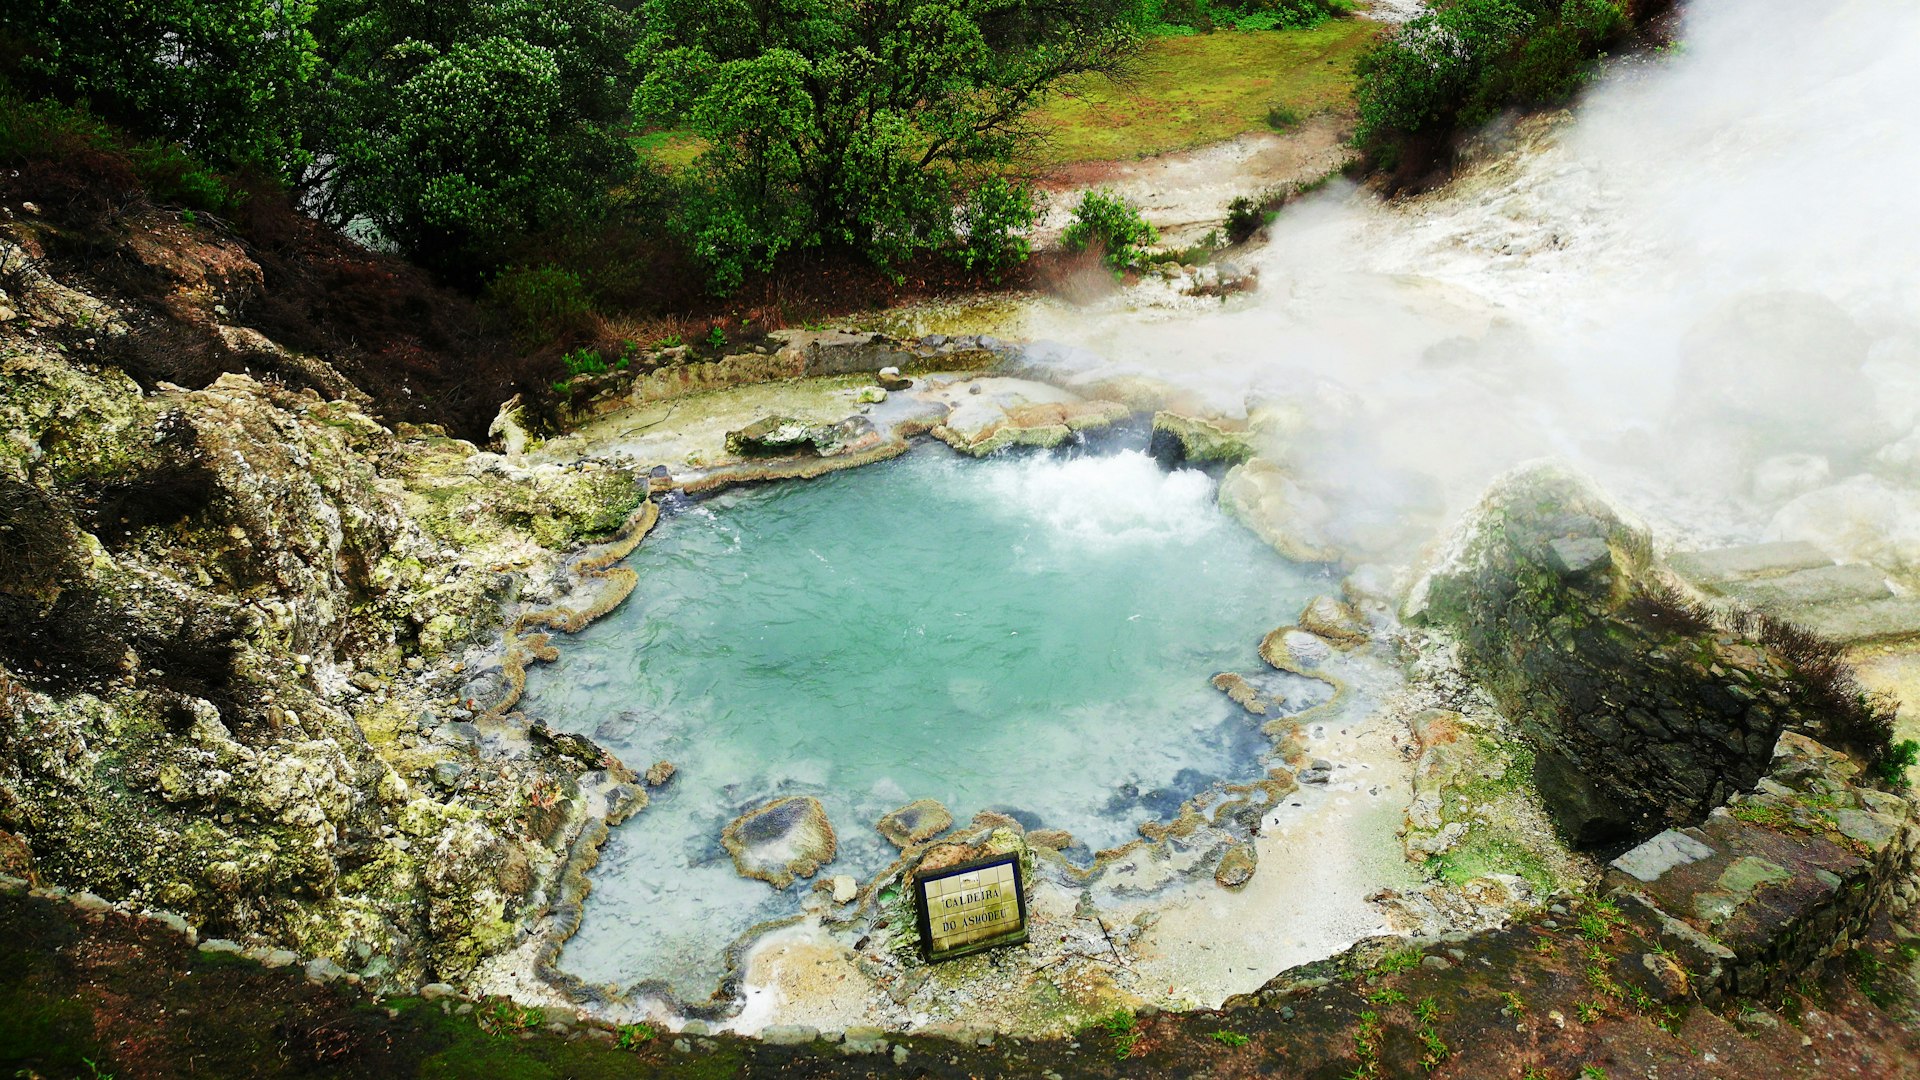 A steaming hot spring in lush greenery. 